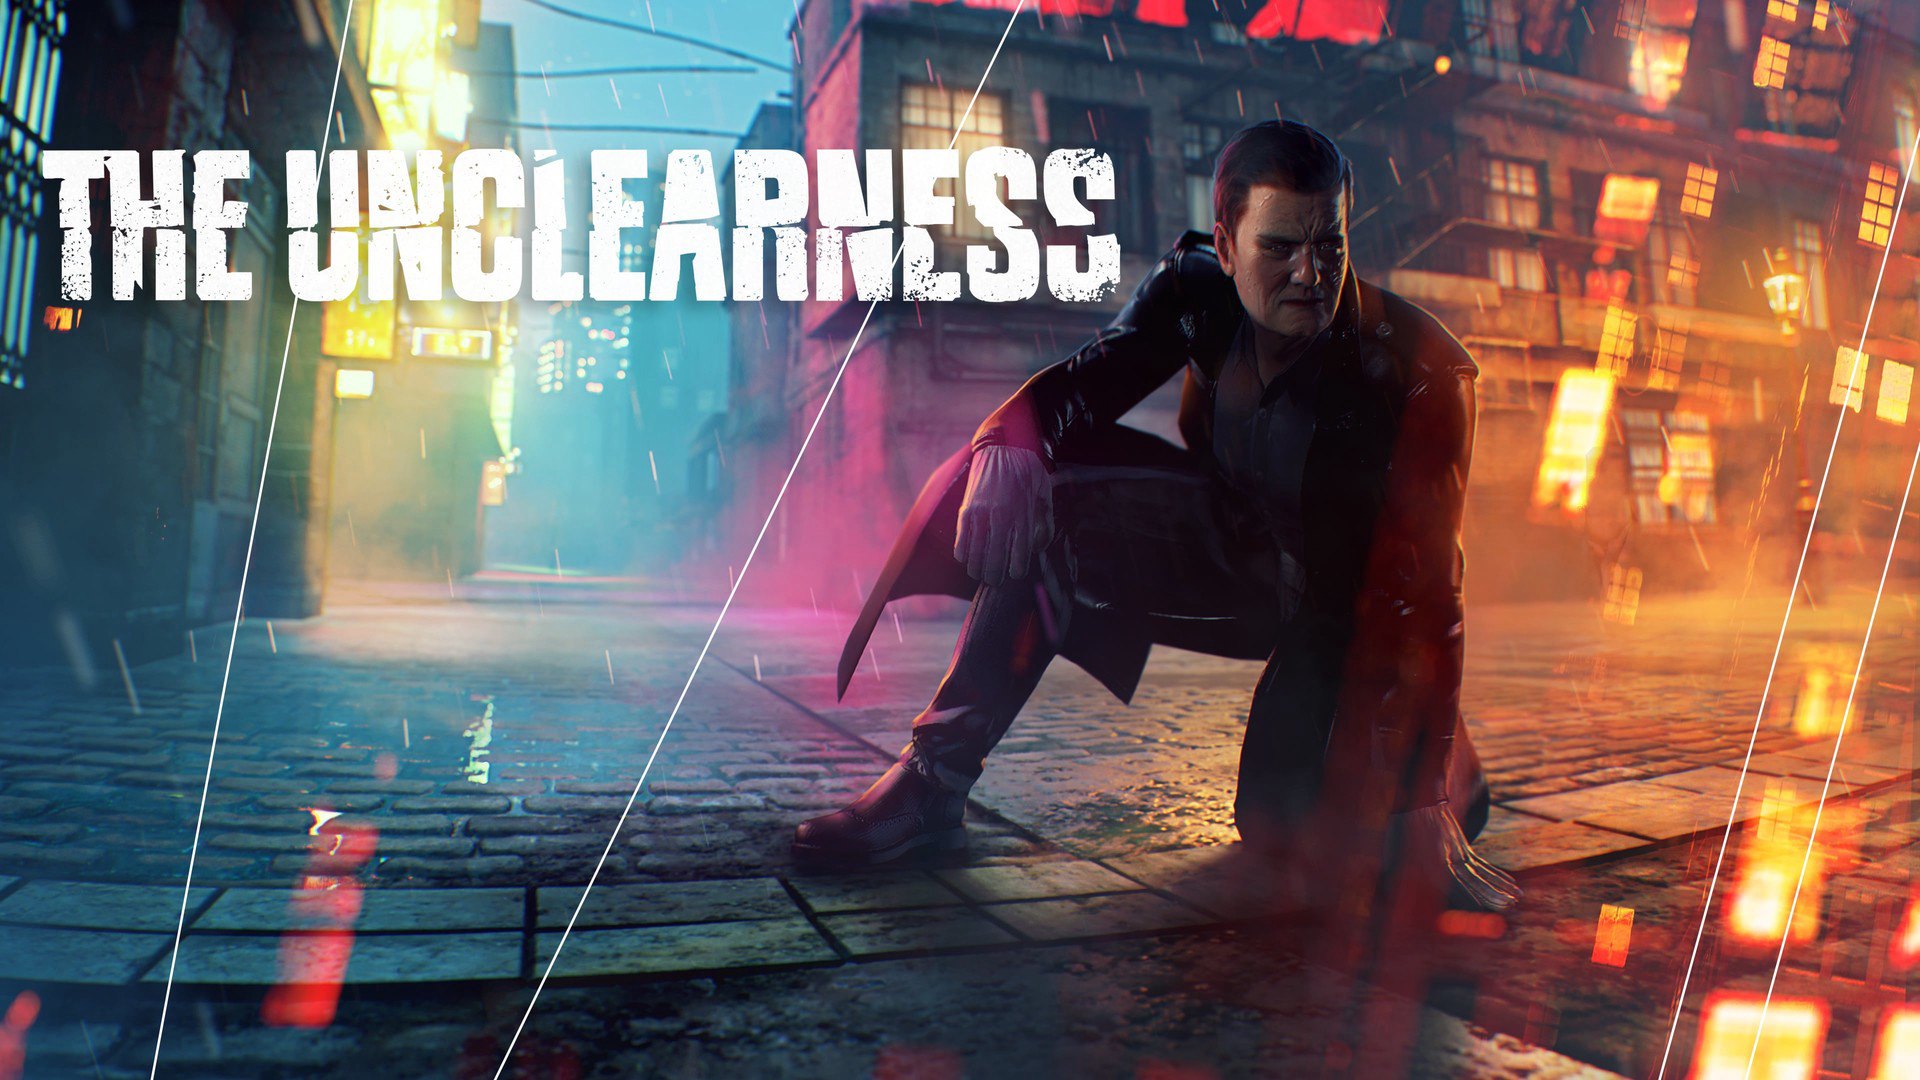 THE UNCLEARNESS Steam CD Key, $6.77